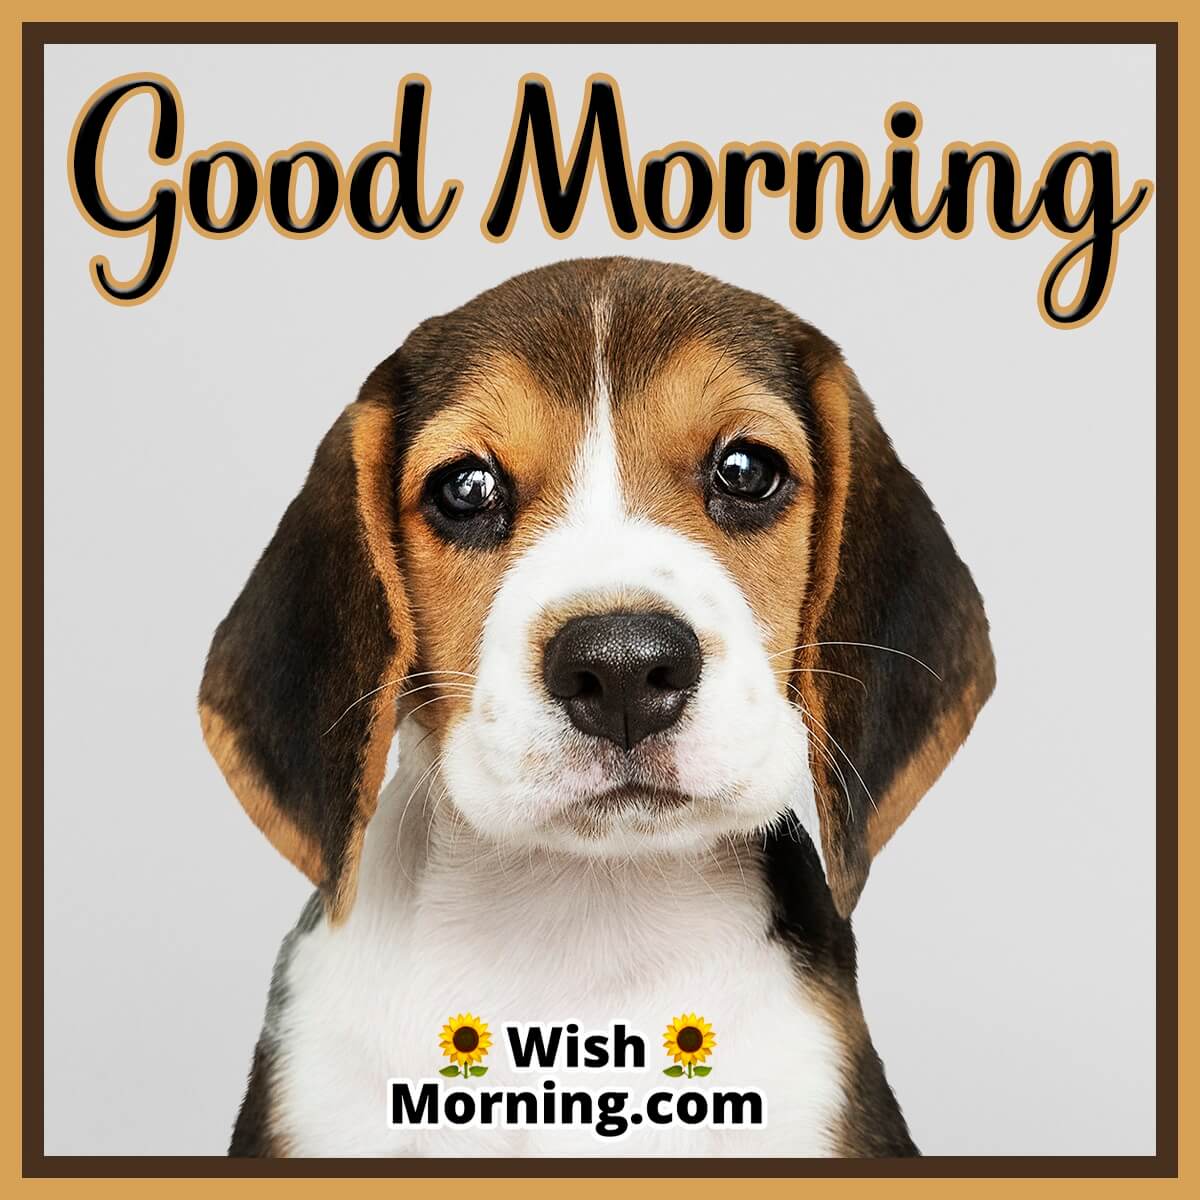 Good Morning With Dogs Image